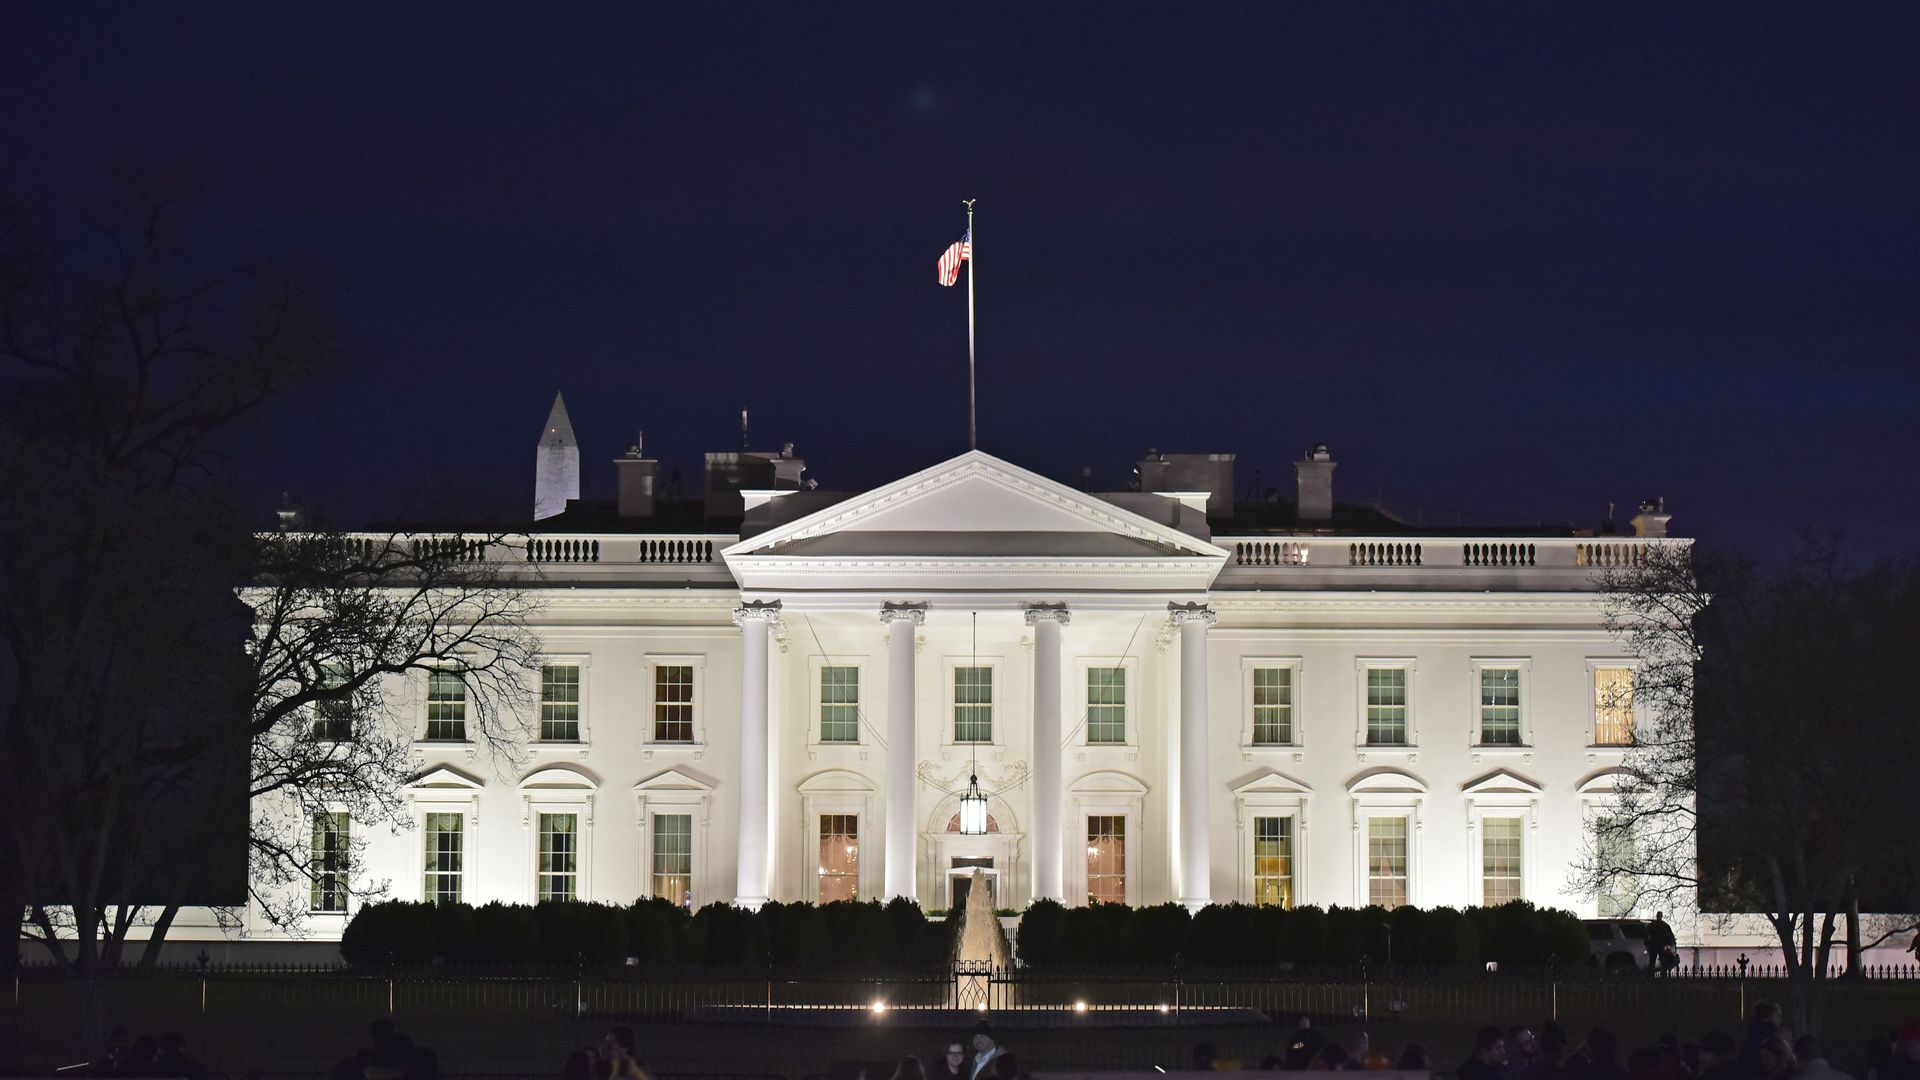 The White House at nighttime